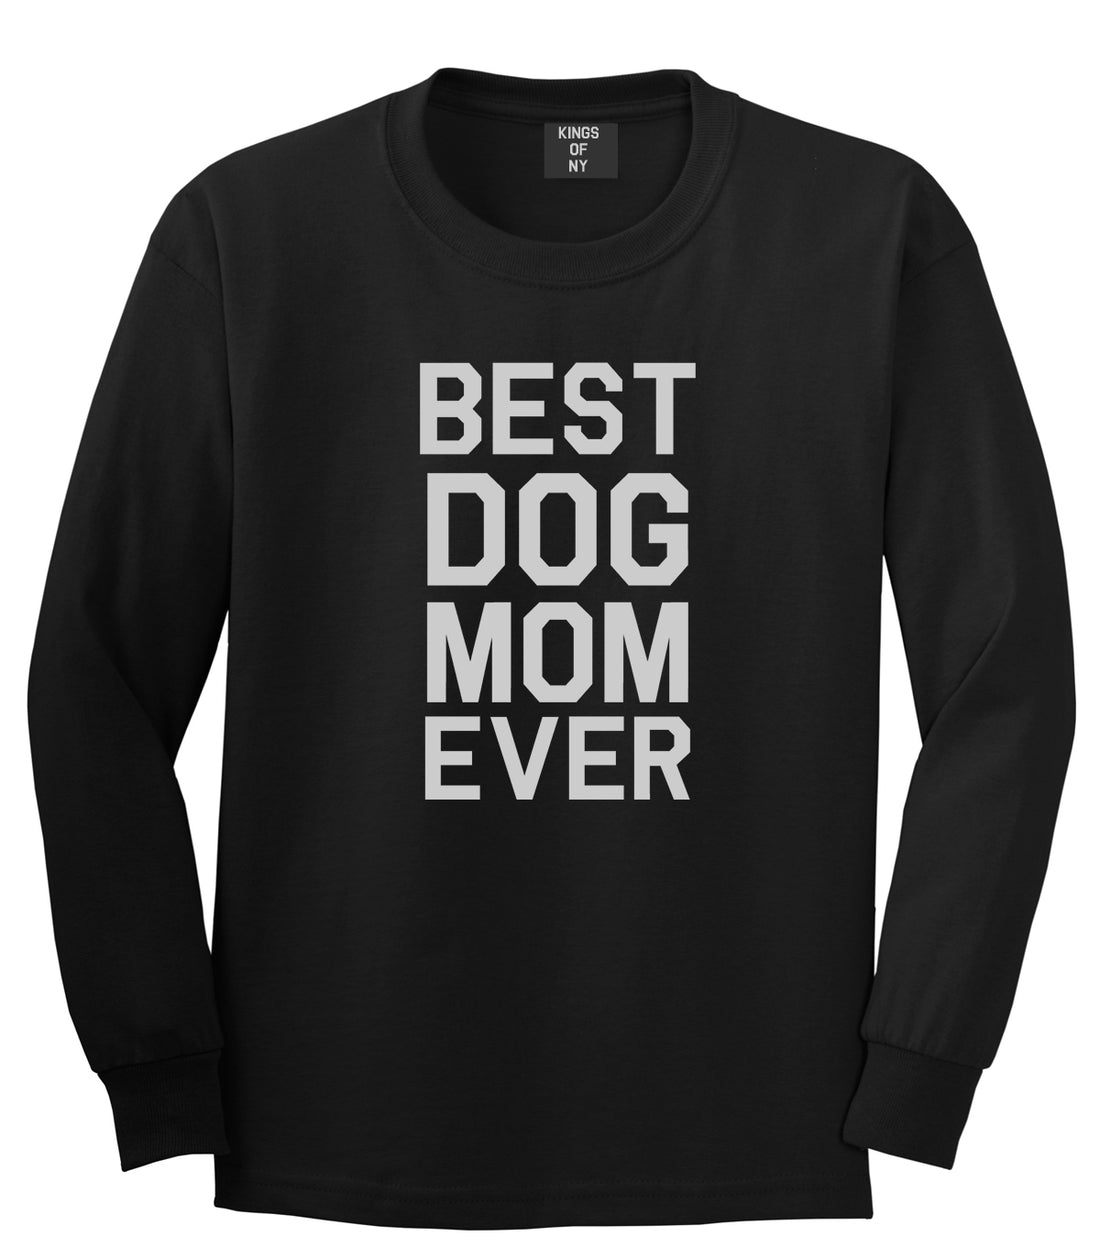 Best Dog Mom Ever Mens Black Long Sleeve T-Shirt by Kings Of NY